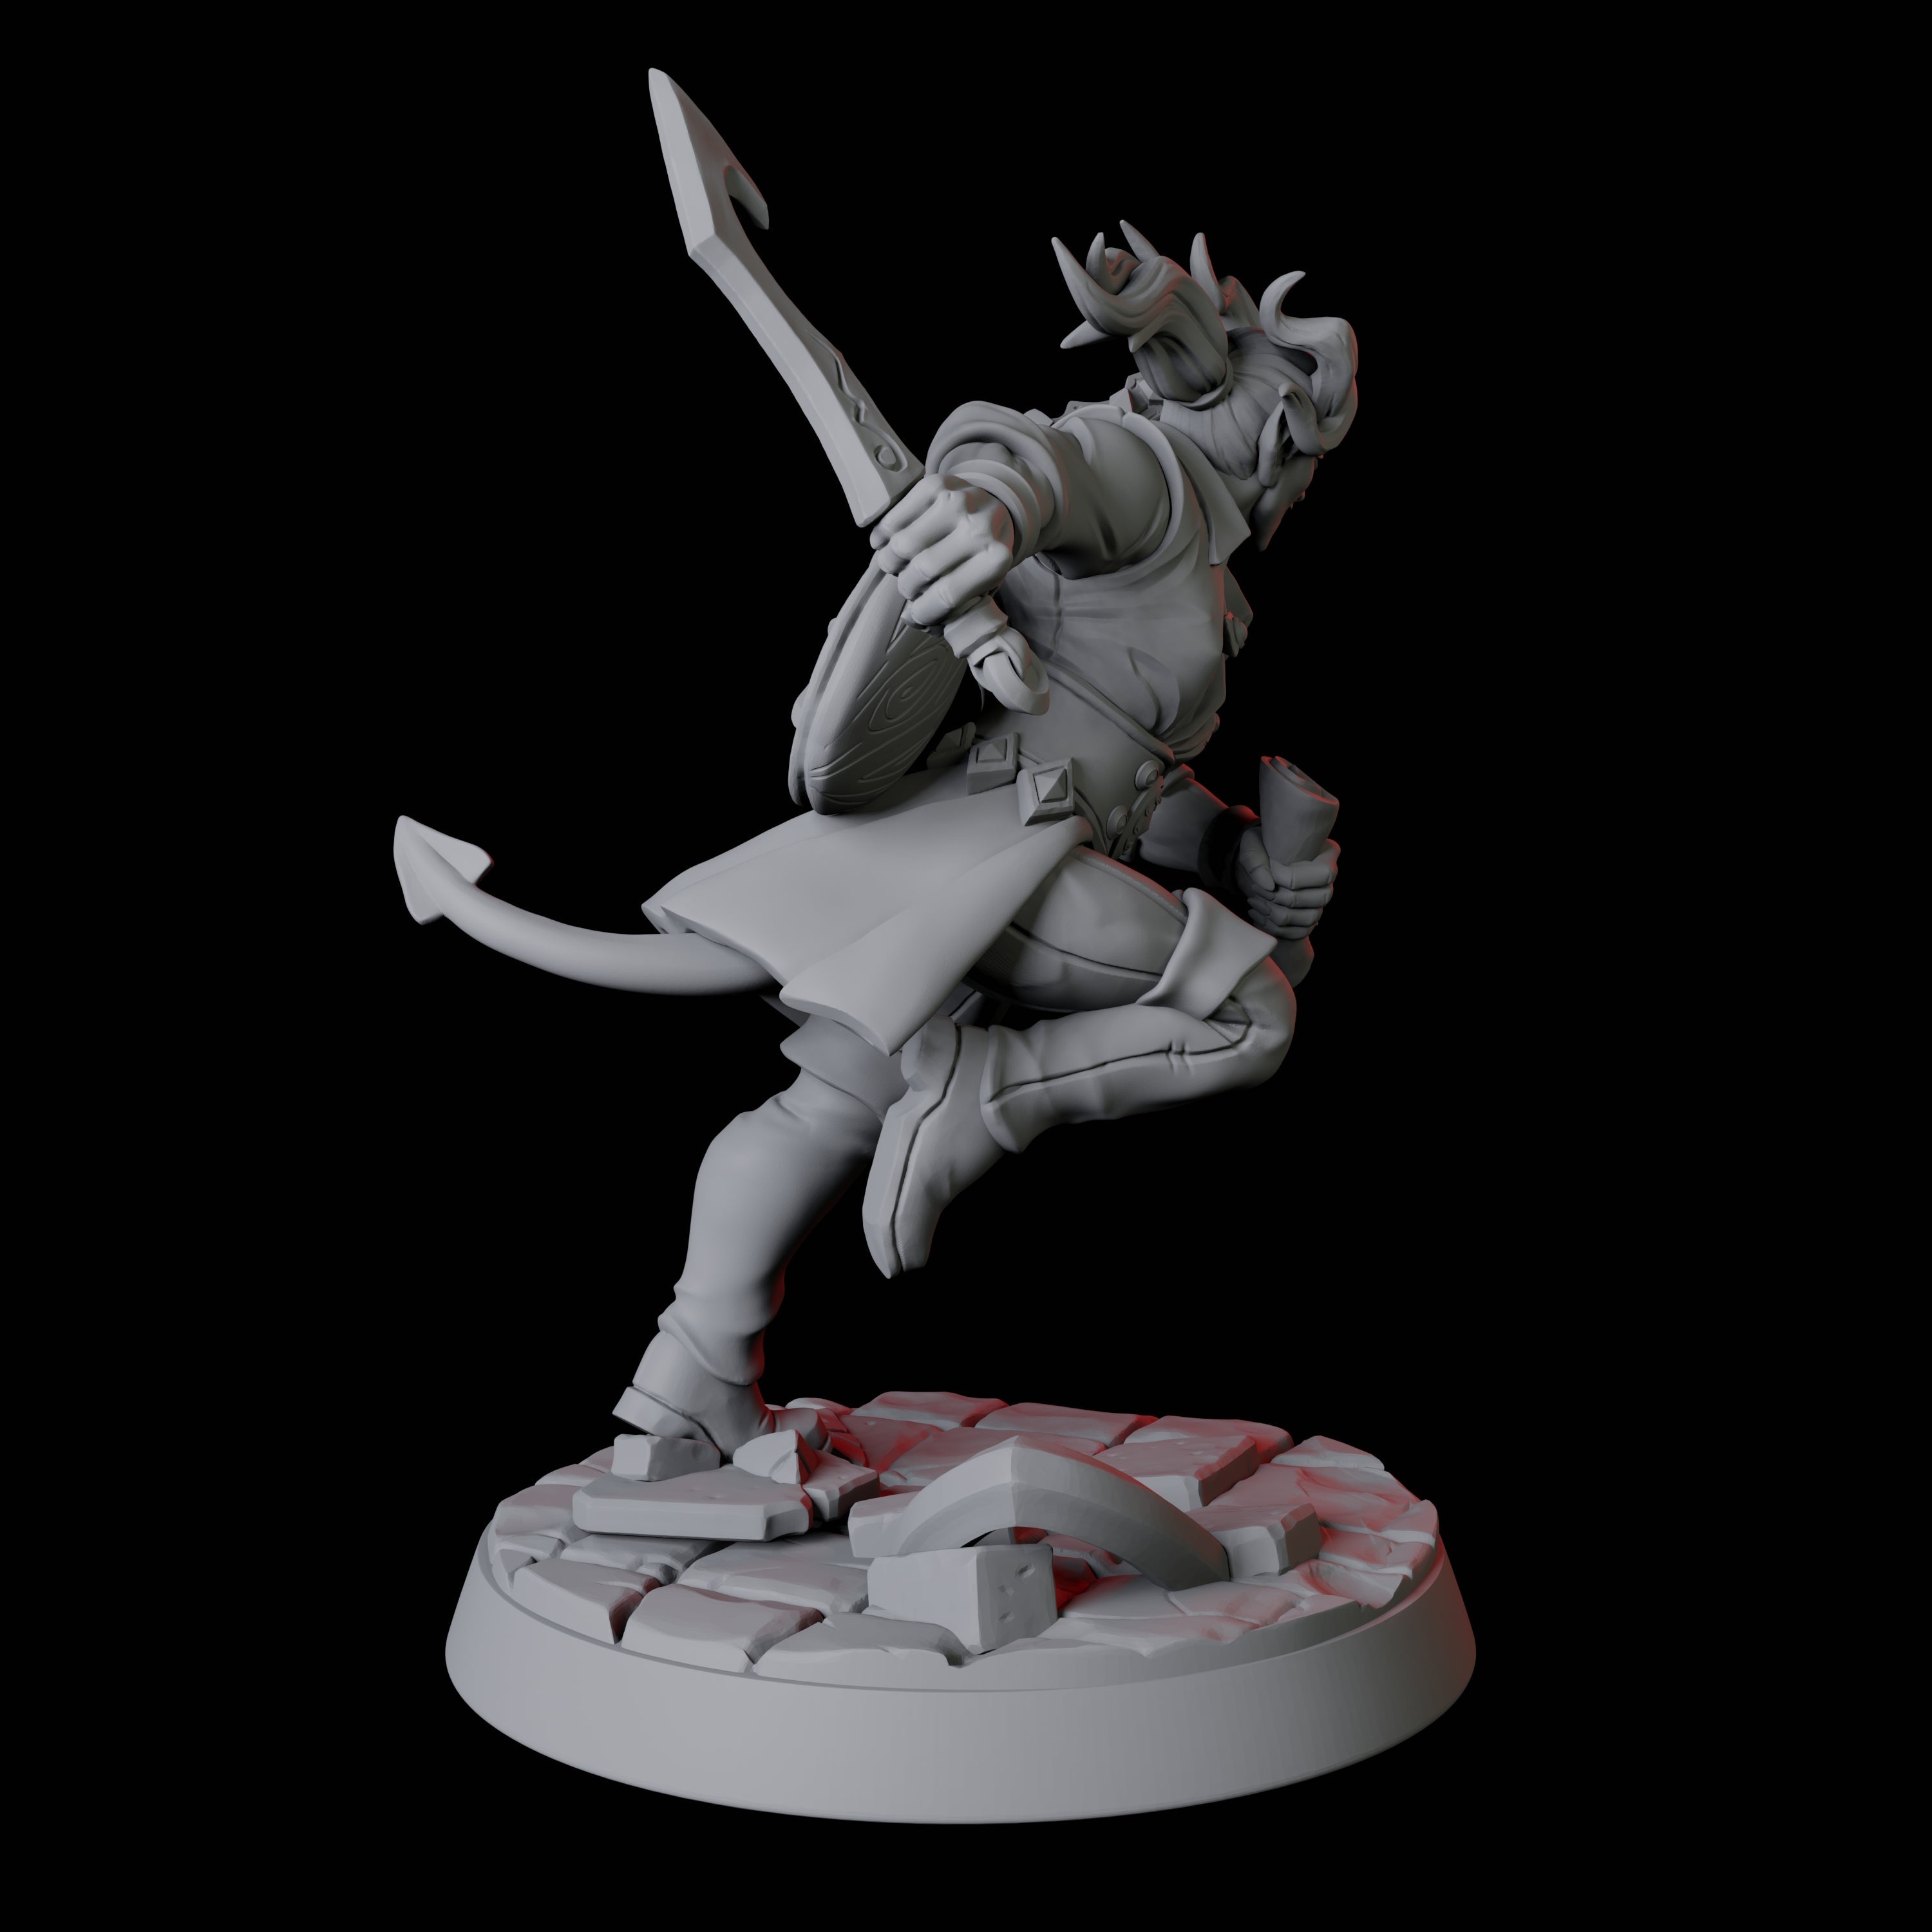 Tiefling Bard A Miniature for Dungeons and Dragons, Pathfinder or other TTRPGs